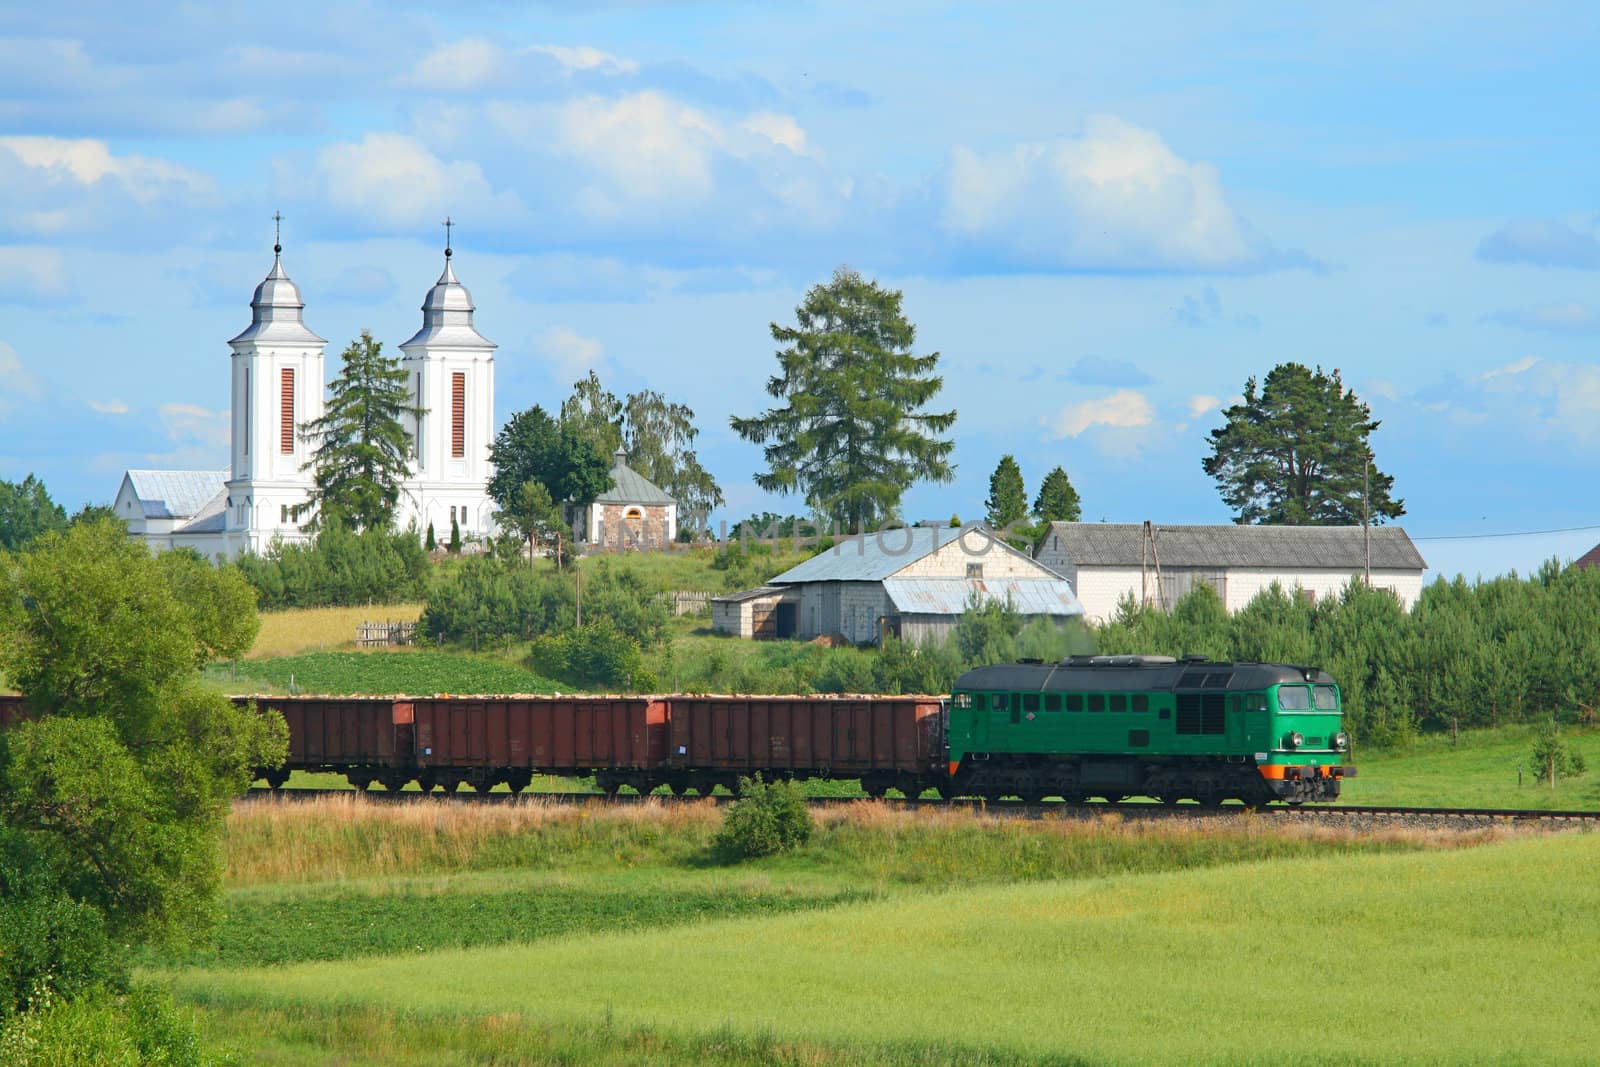 Freight train passing the village with a church in background
